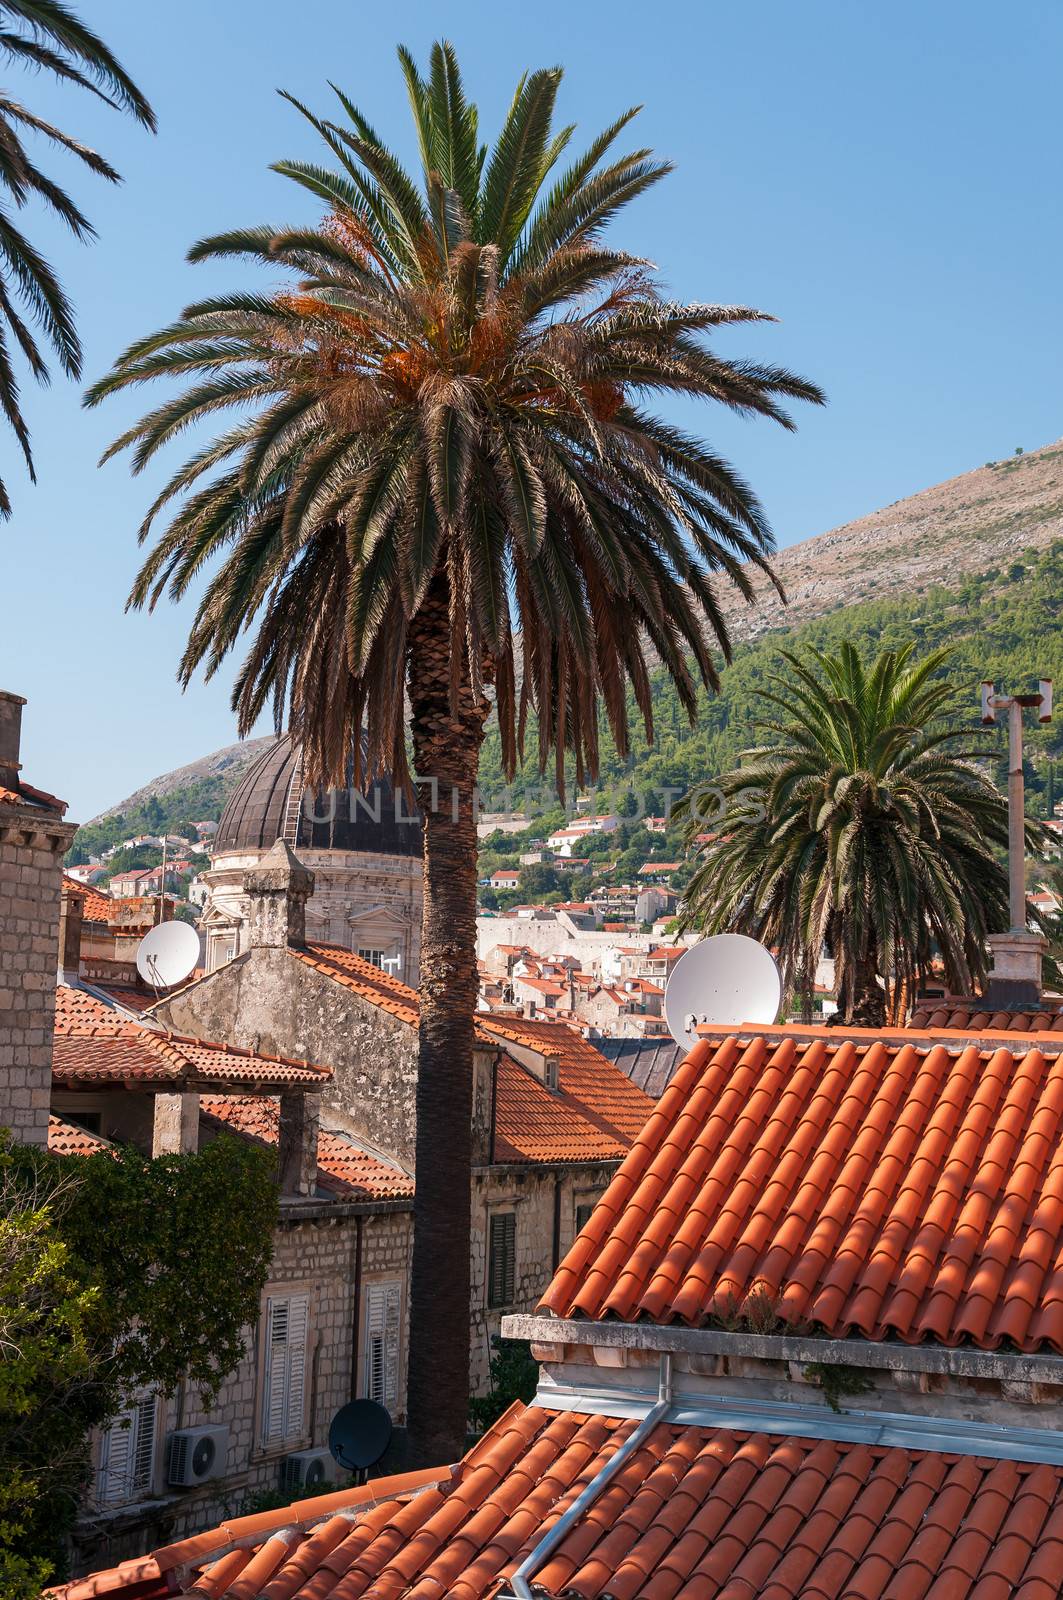 Palmtree in the middle of Dubrovnik Old City in Croatia